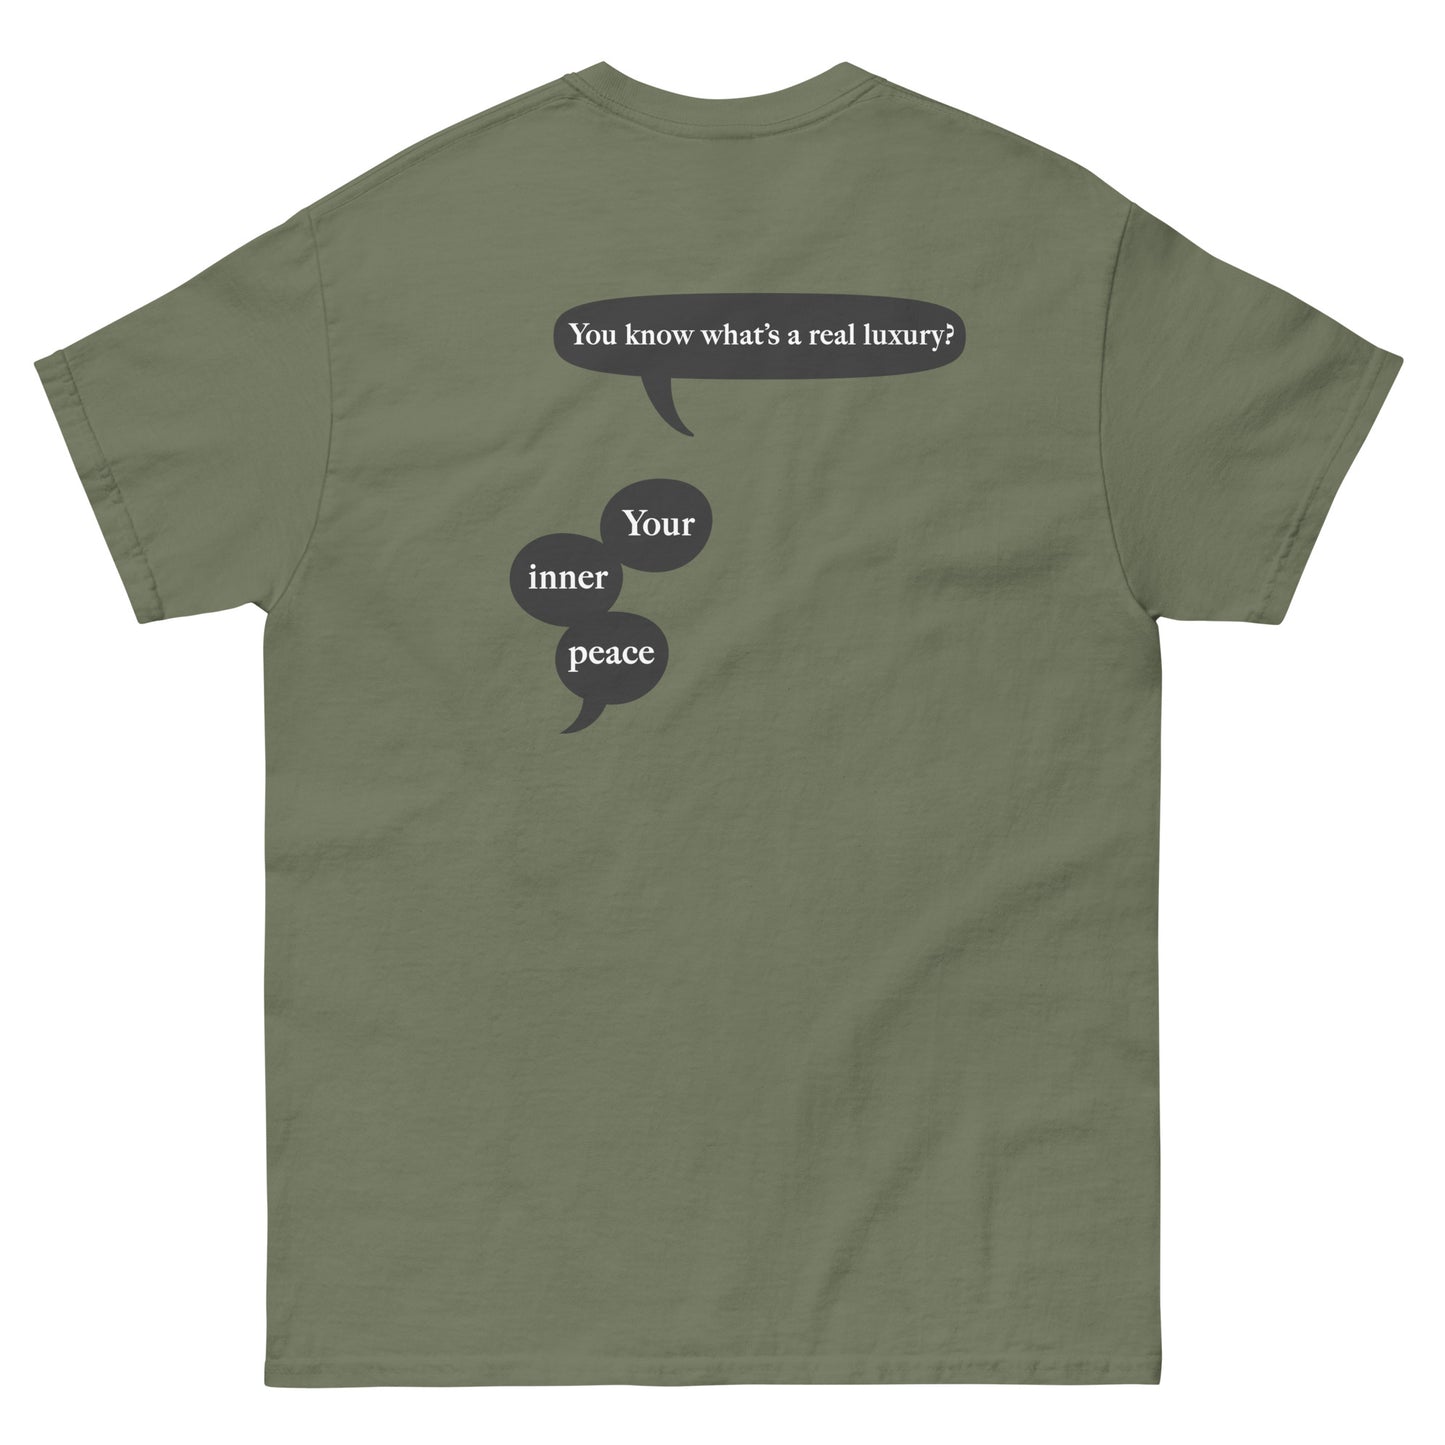 Green High Quality Tee - Front Design with "inner peace " print on left chest - Back Design with a Phrase "You know what's the real luxury? Your inner peace." print